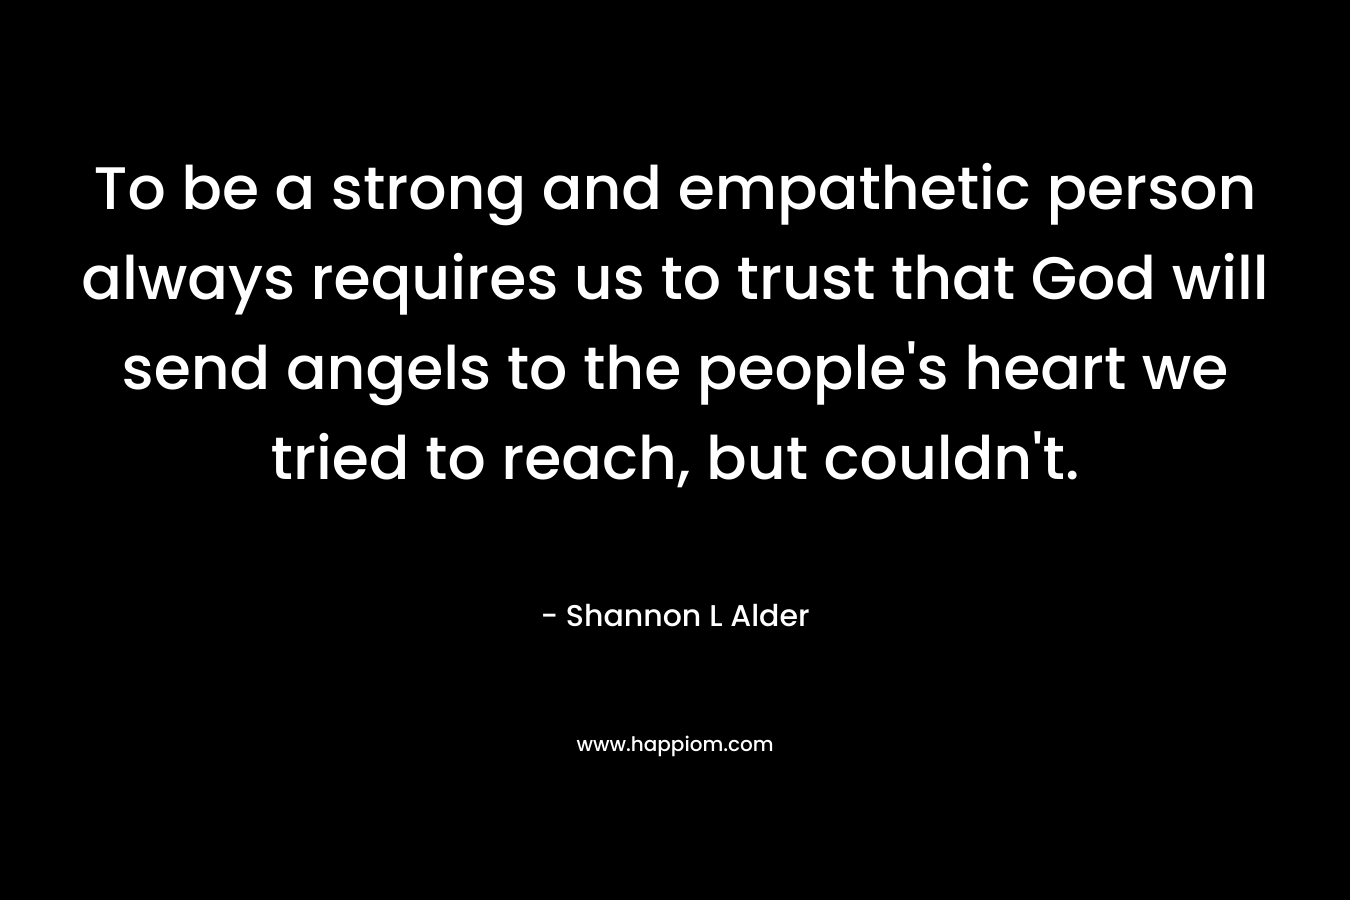 To be a strong and empathetic person always requires us to trust that God will send angels to the people’s heart we tried to reach, but couldn’t. – Shannon L Alder